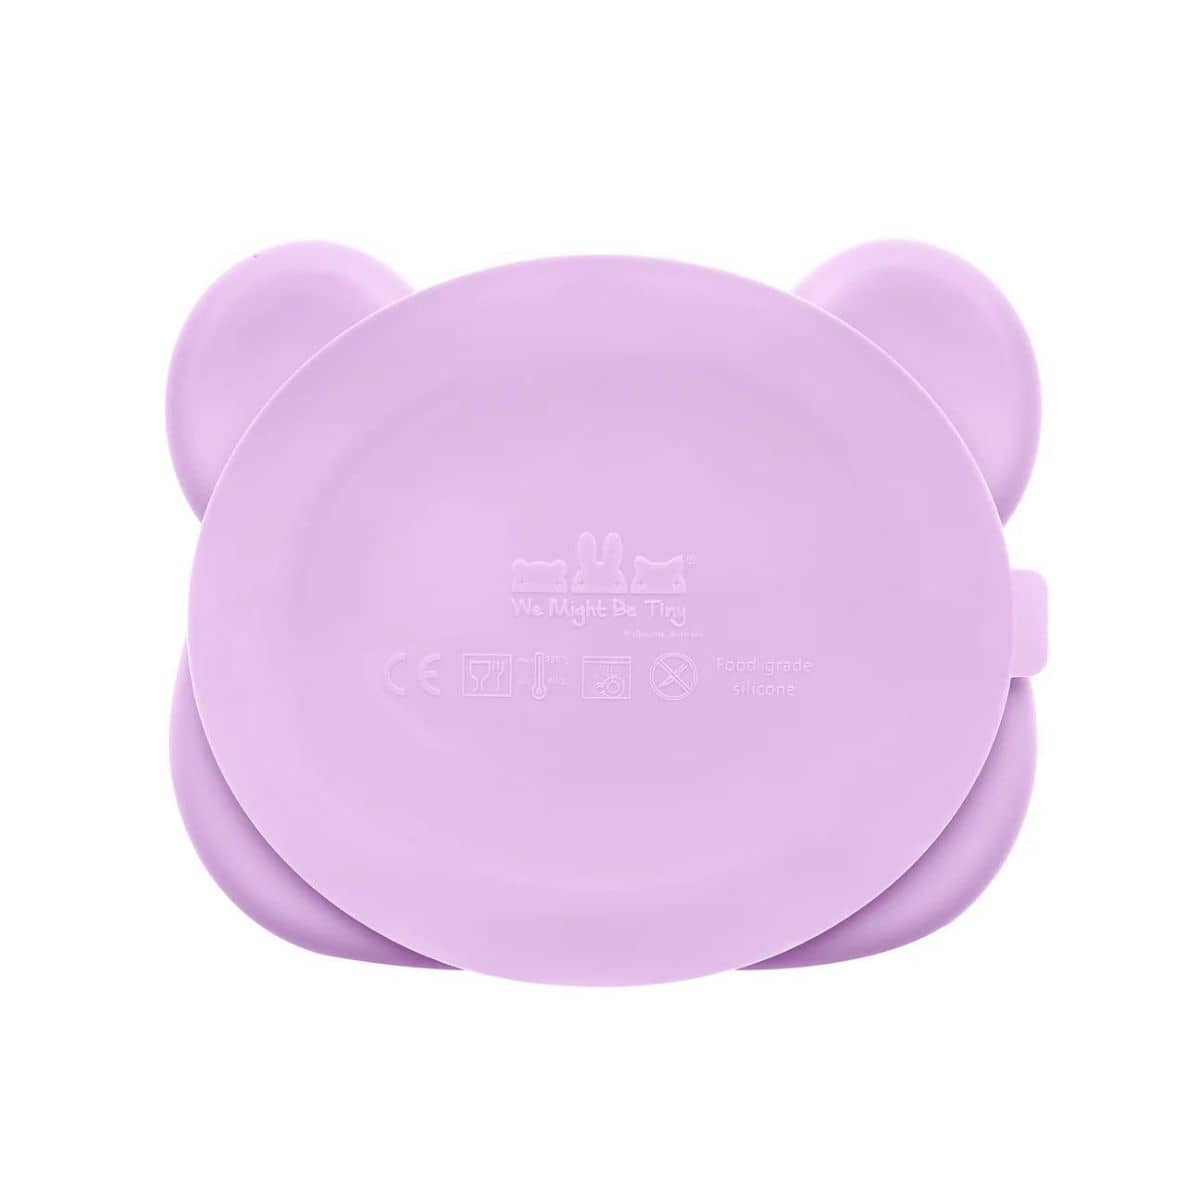 We Might Be Tiny Stickie Silicone Suction Plate - Bear